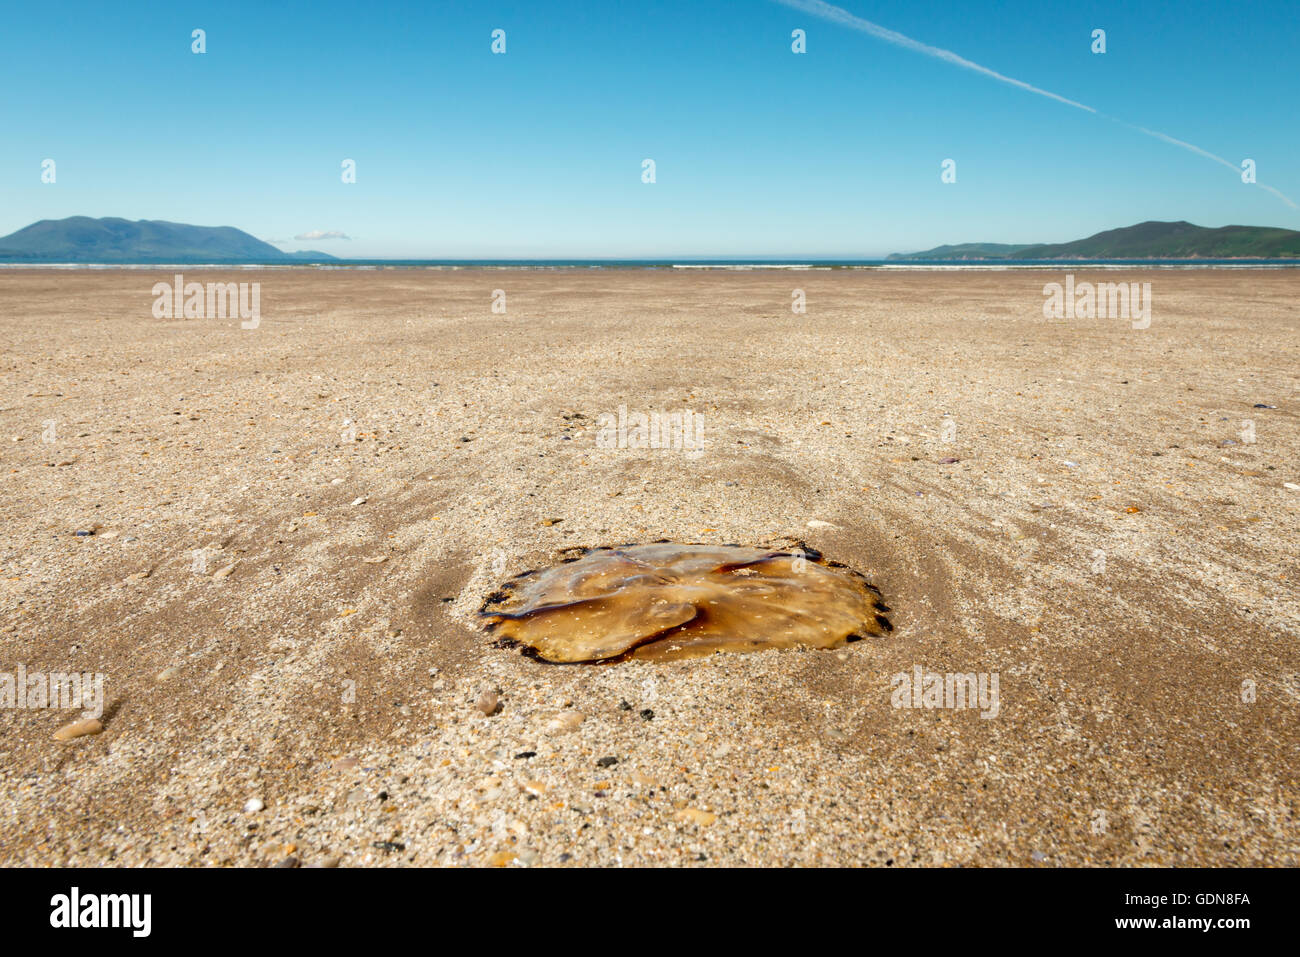 Close-up view of a dead jellyfish low-level view on a beach on a sunny day heatwave Ireland Stock Photo